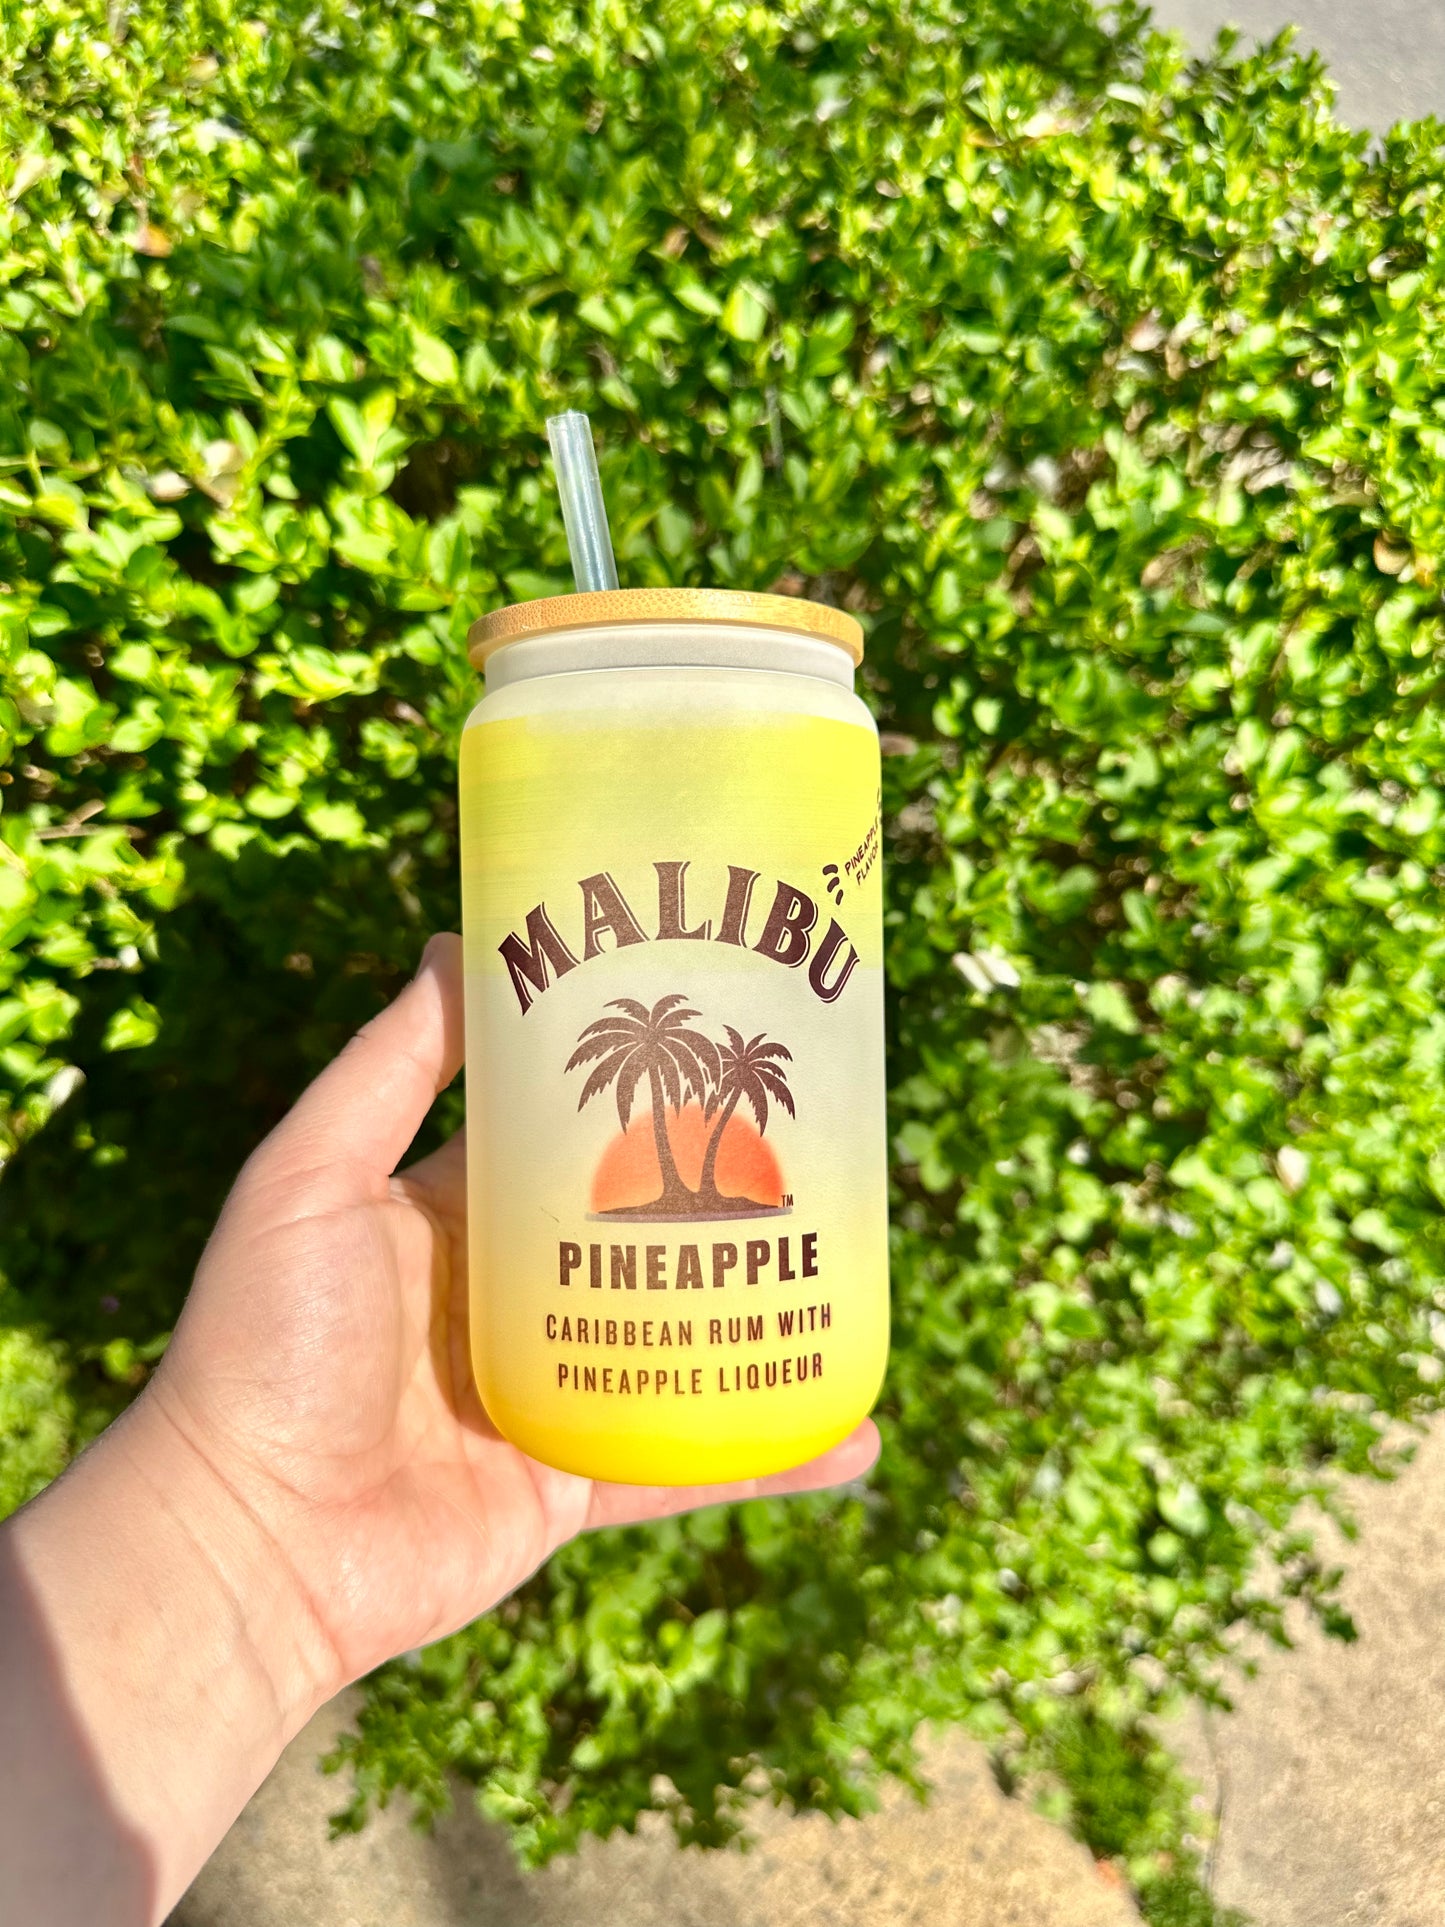 Malibu inspired frosted glass tumbler